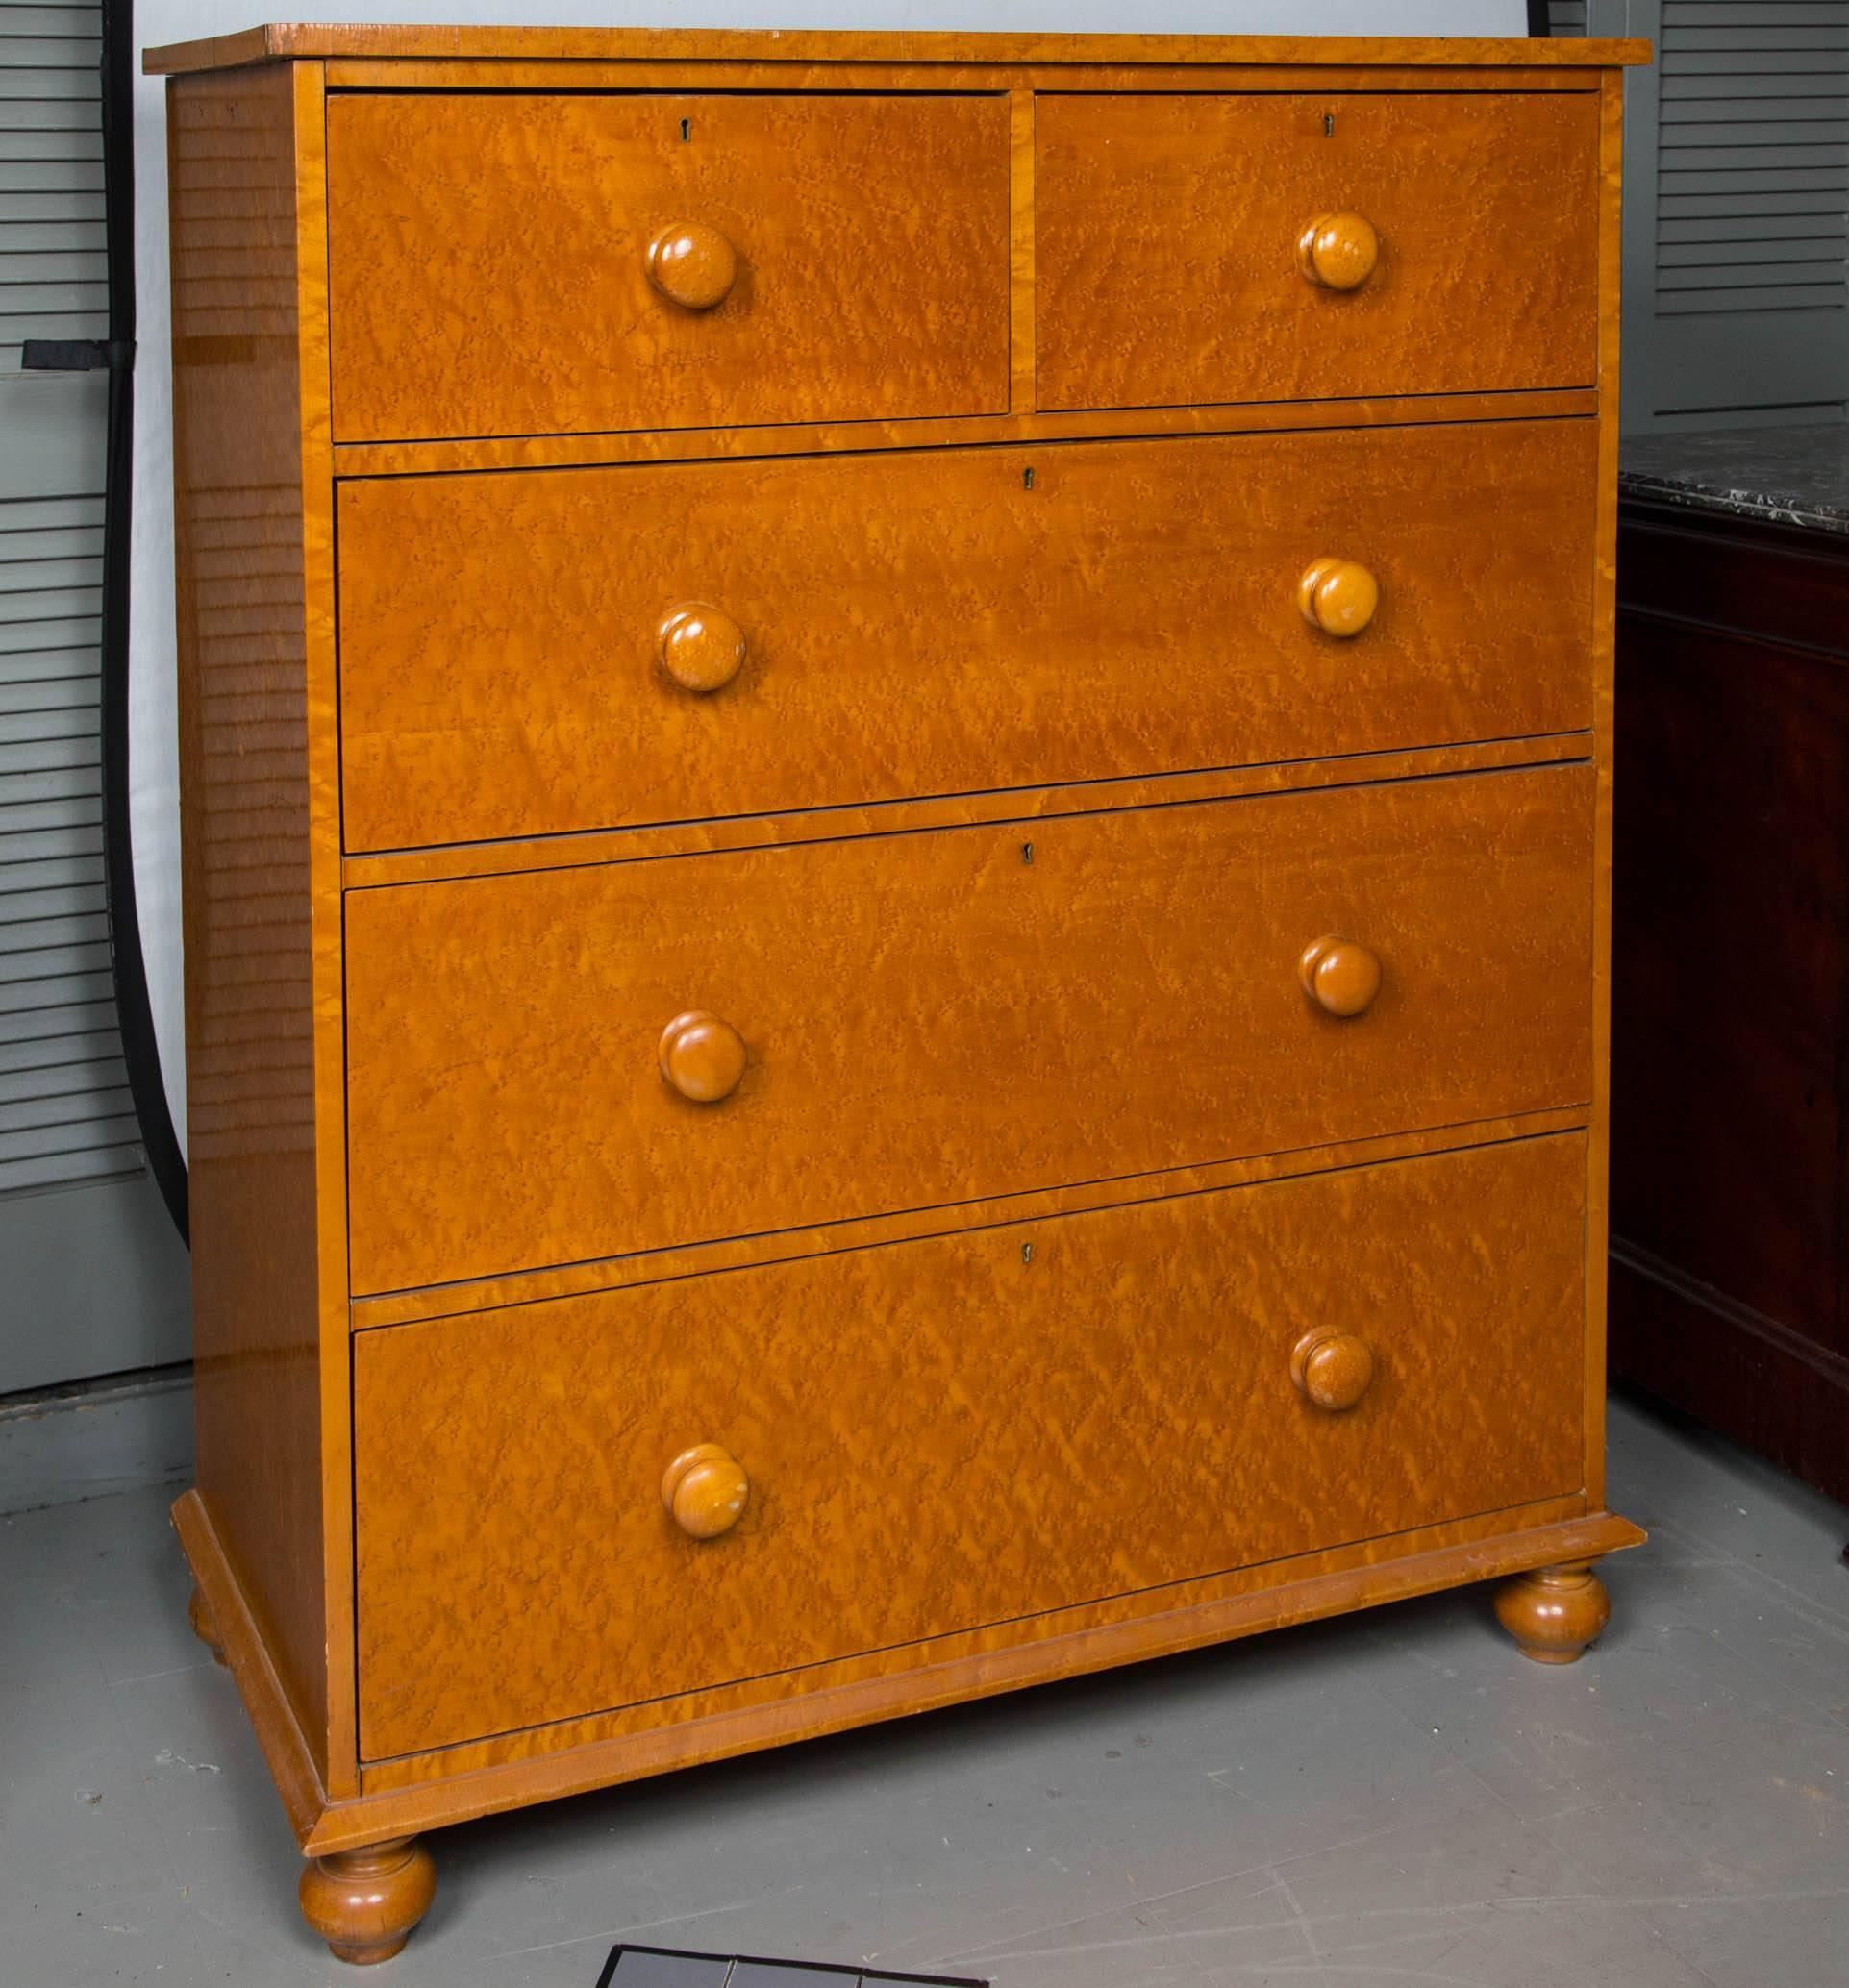 Very unusual two over three chest of drawers. The drawers are extremely deep which will provide plenty of storage.
This is a wonderful piece that was purchased in England and has a very distinctive presence.